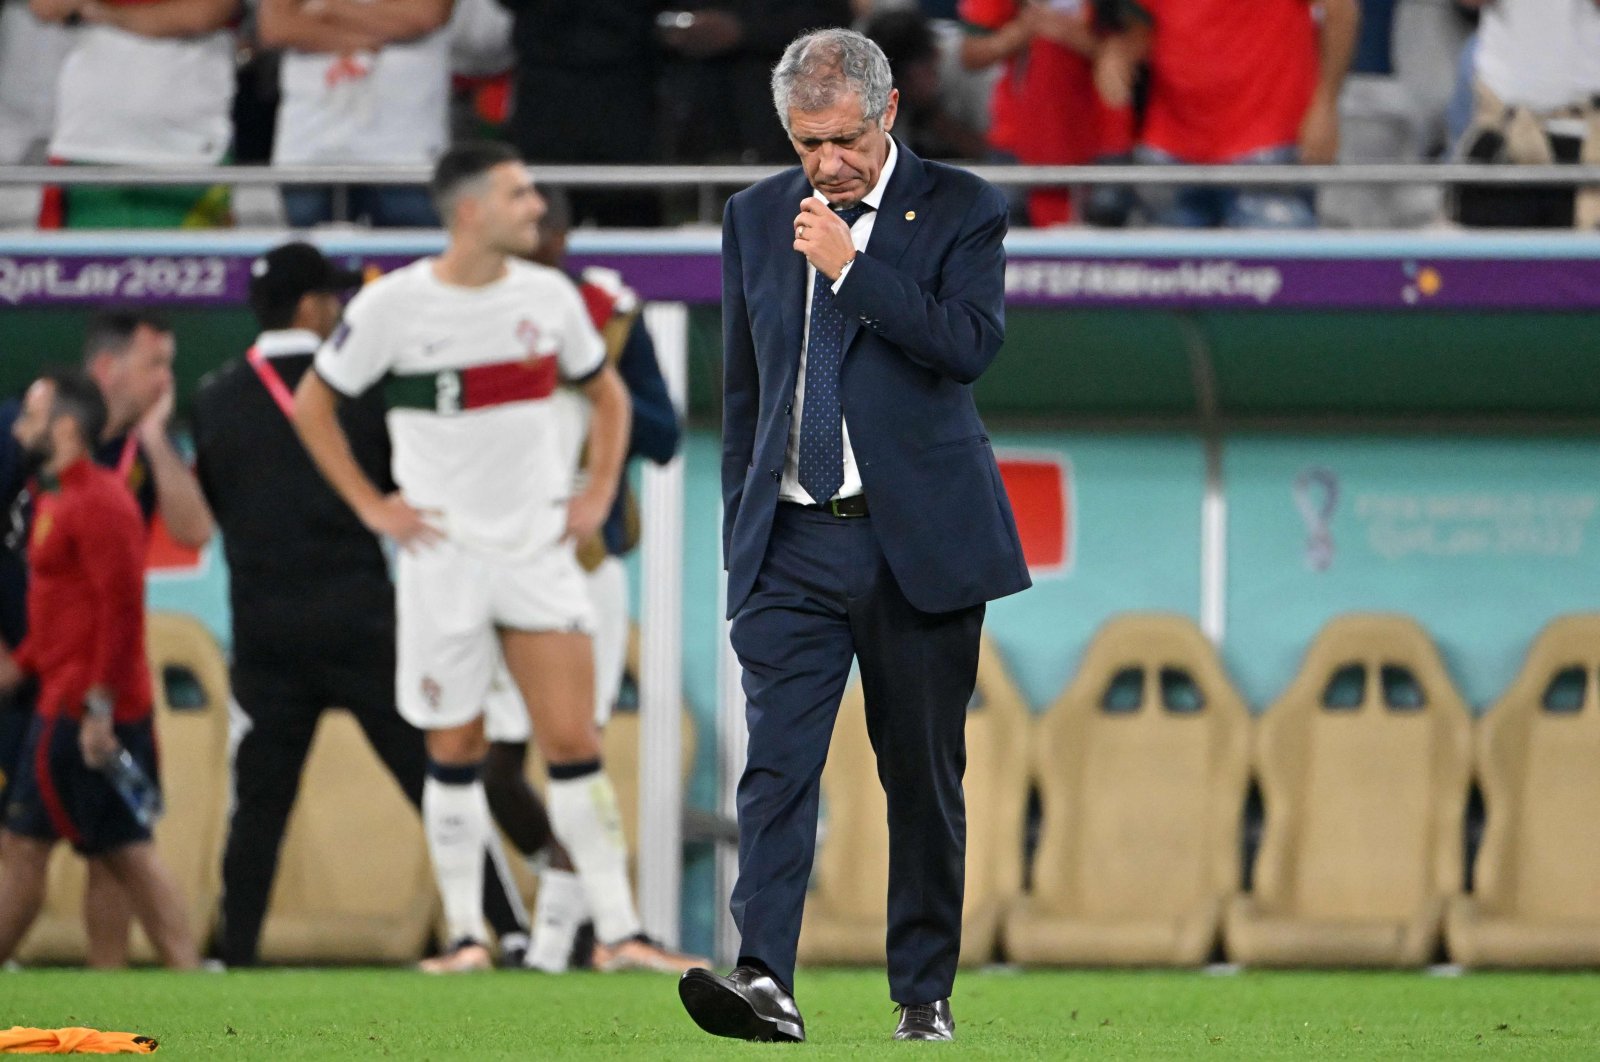 Portugal&#039;s coach Fernando Santos reacts after his team lost the Qatar 2022 World Cup quarterfinal football match between Morocco and Portugal at the Al-Thumama Stadium in Doha, Qatar, Dec. 10, 2022. (AFP Photo)